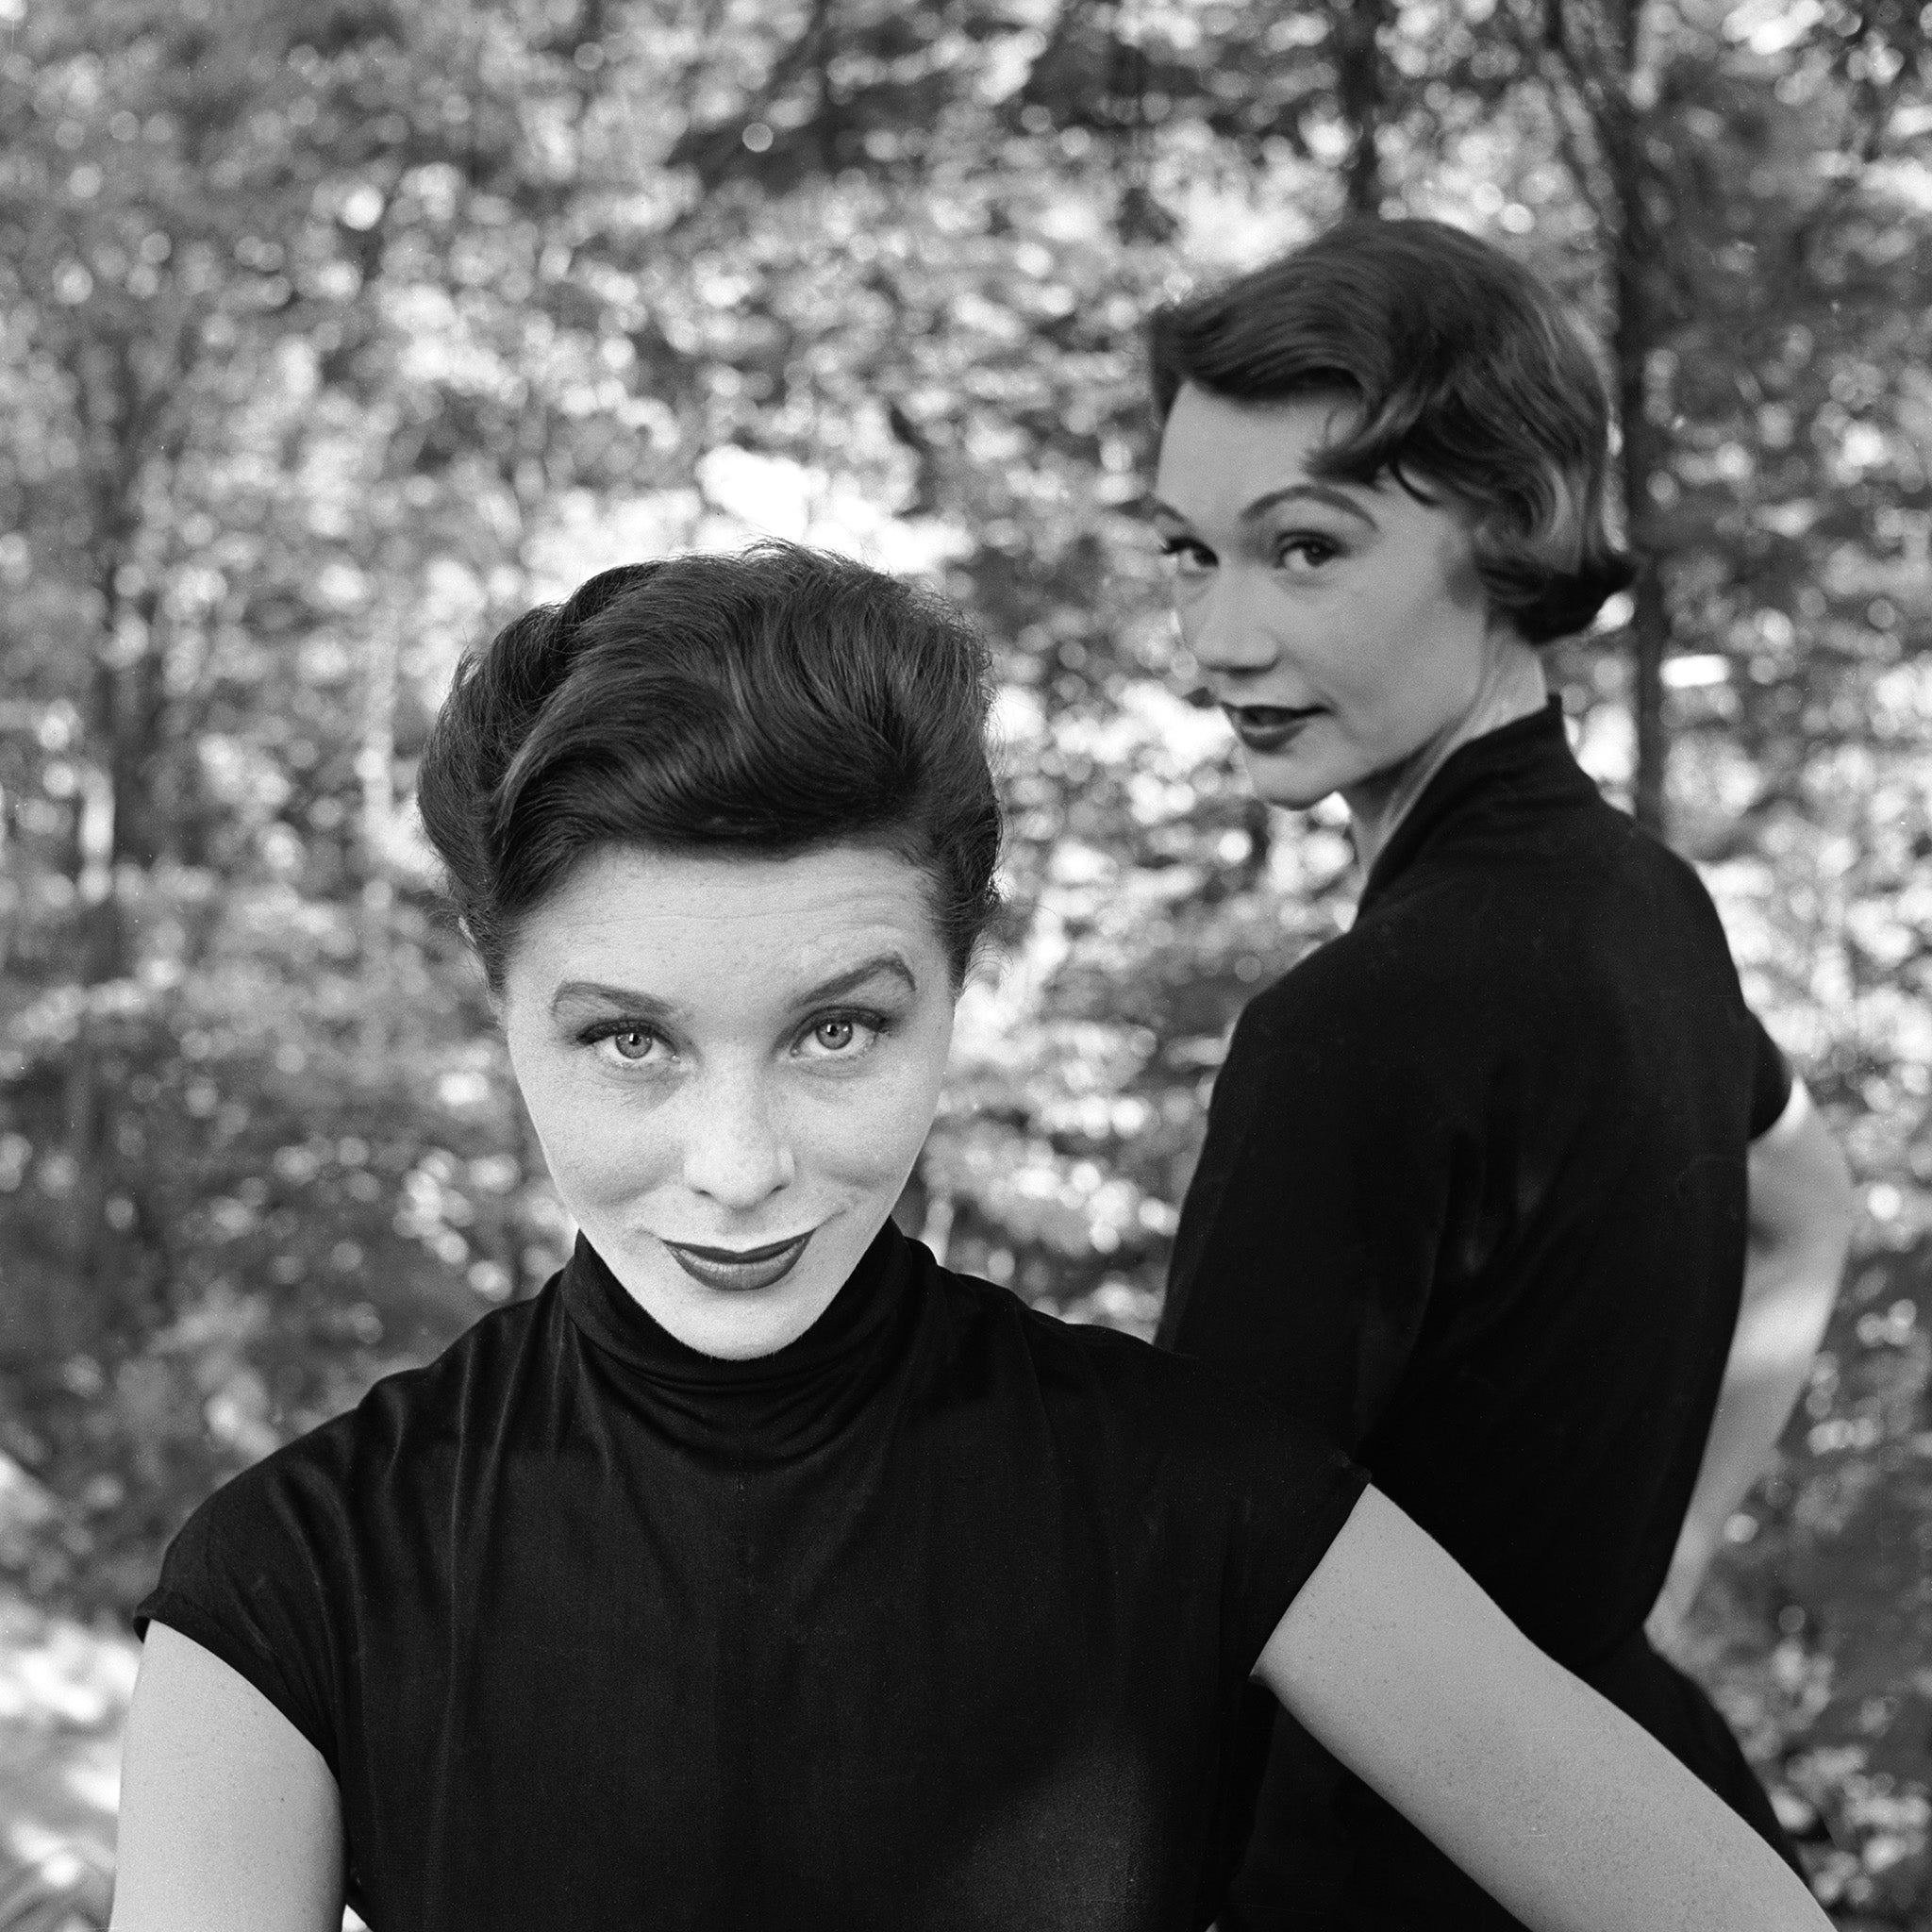 Graziani, foreground, with fellow model Sophie Malgat in 1950